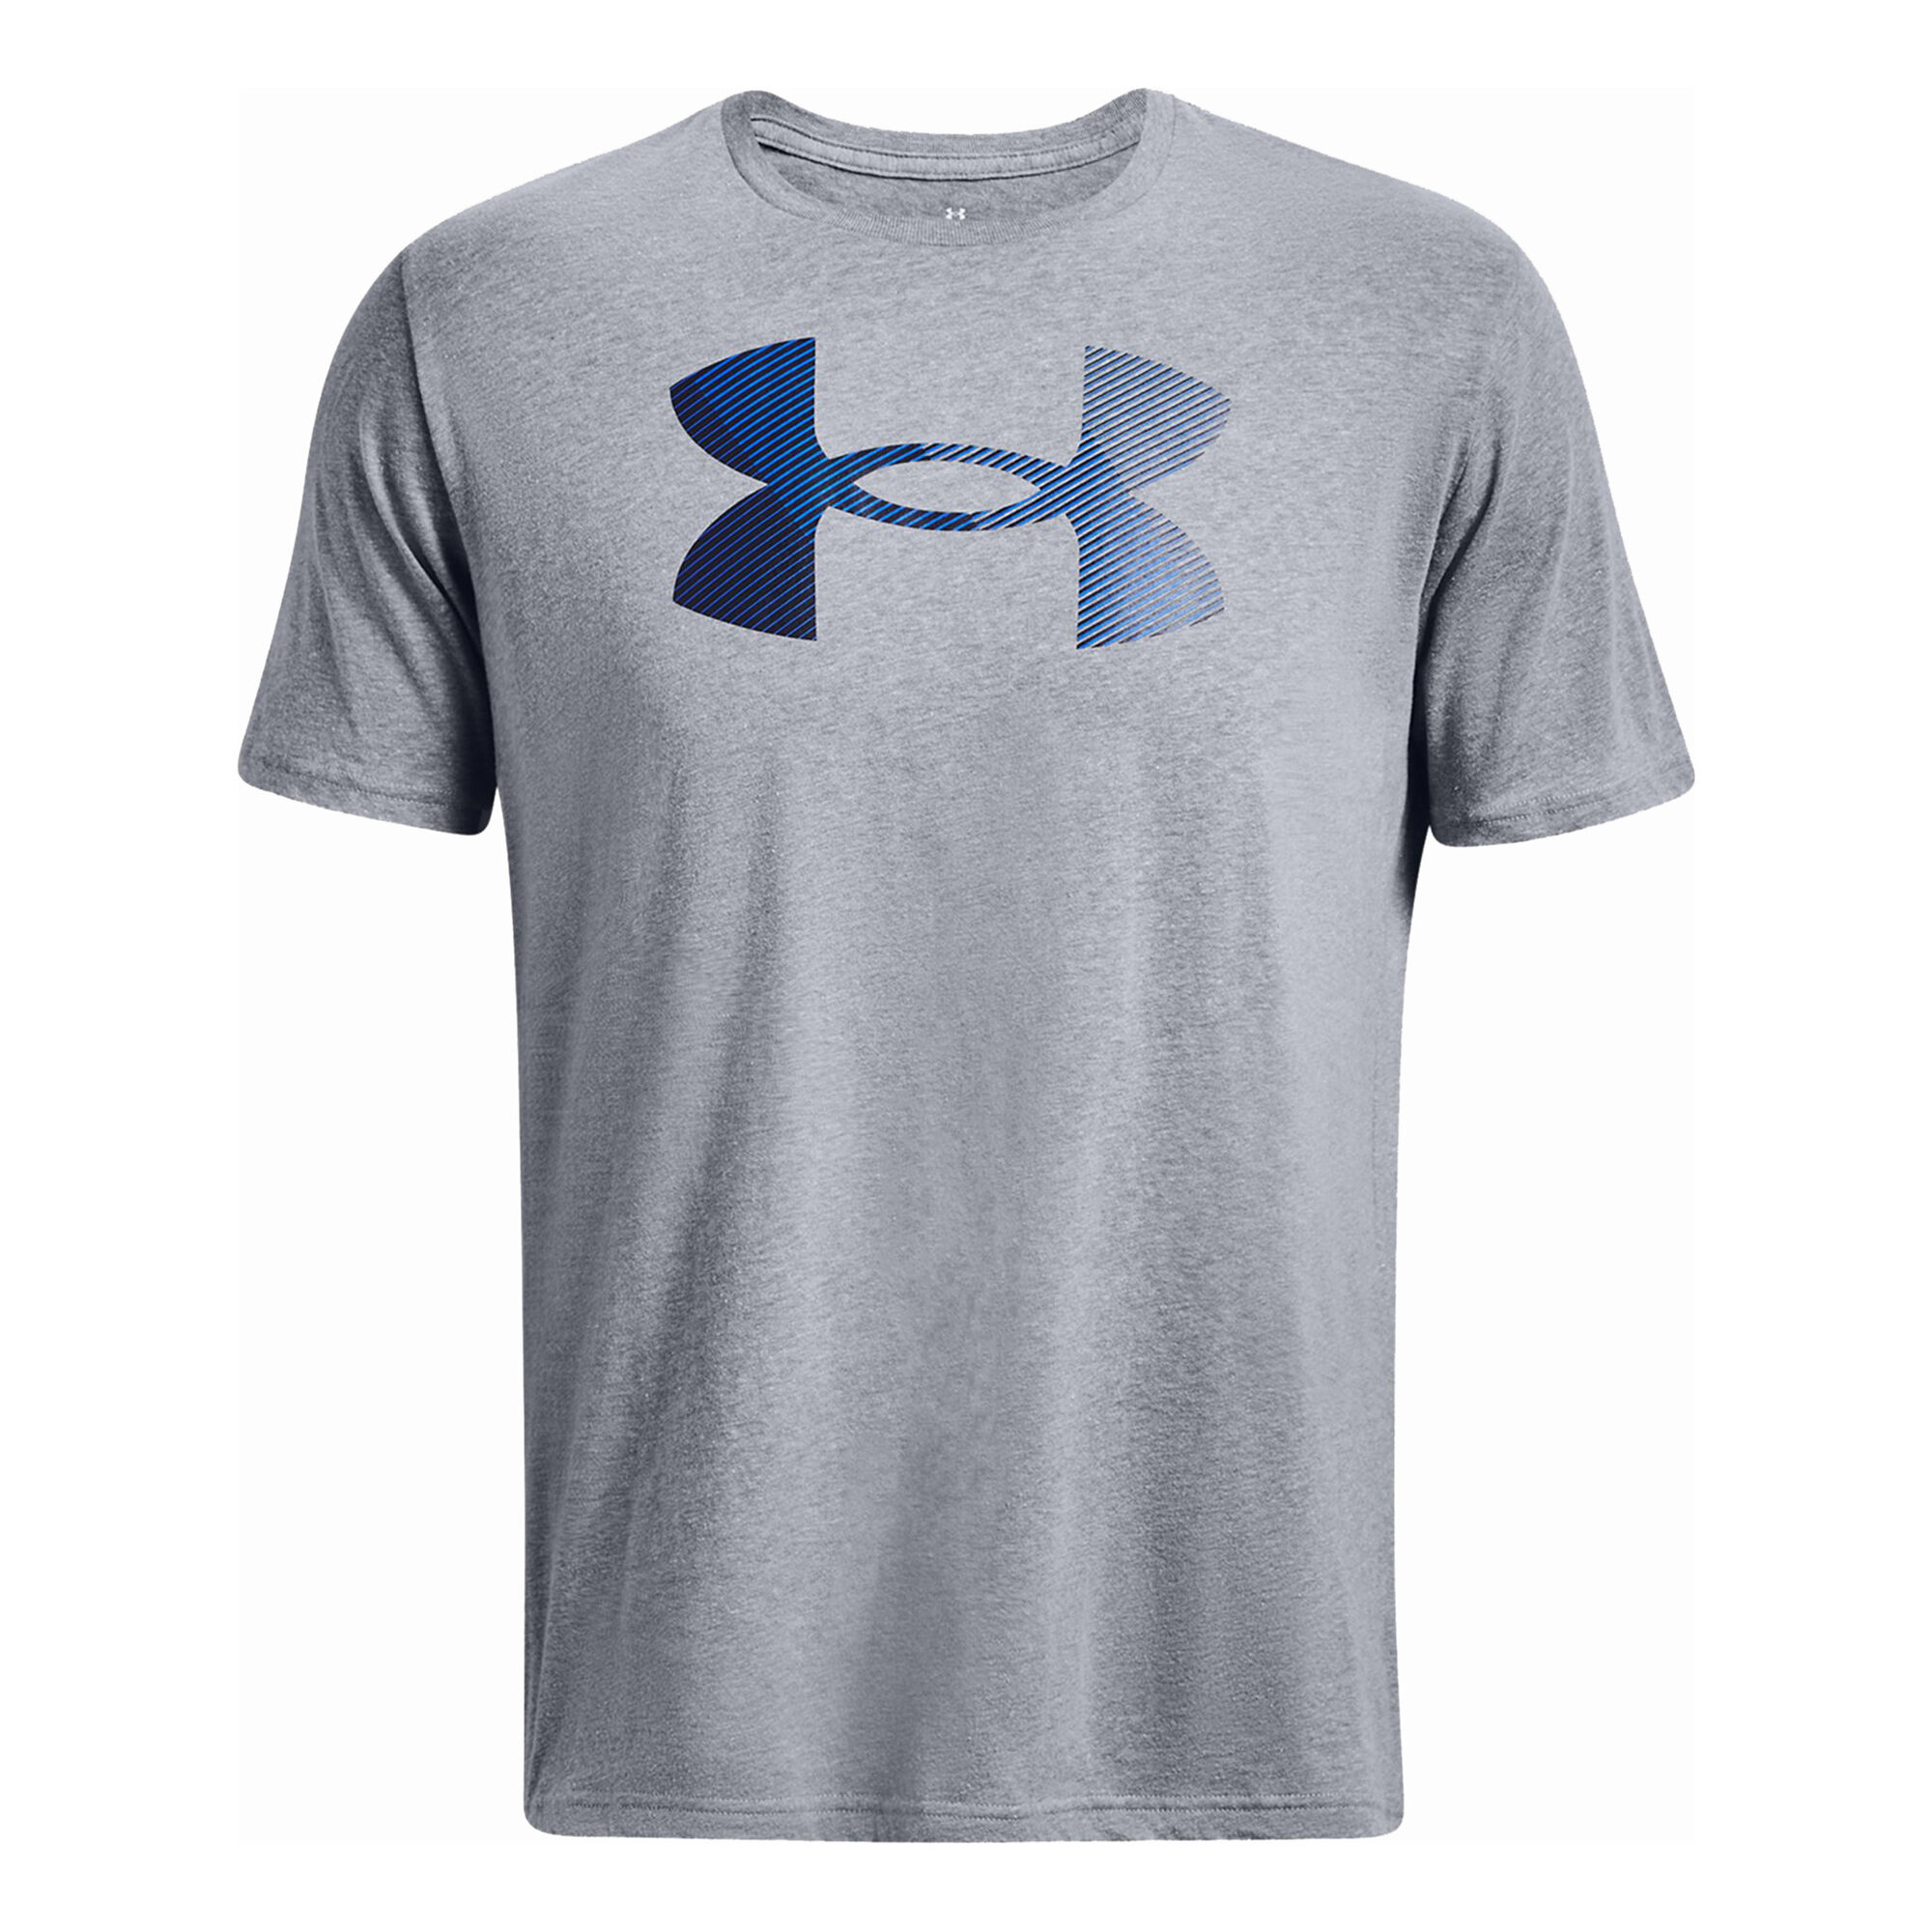 Tee-shirt Logo Under Armour Grande Taille homme grande taille